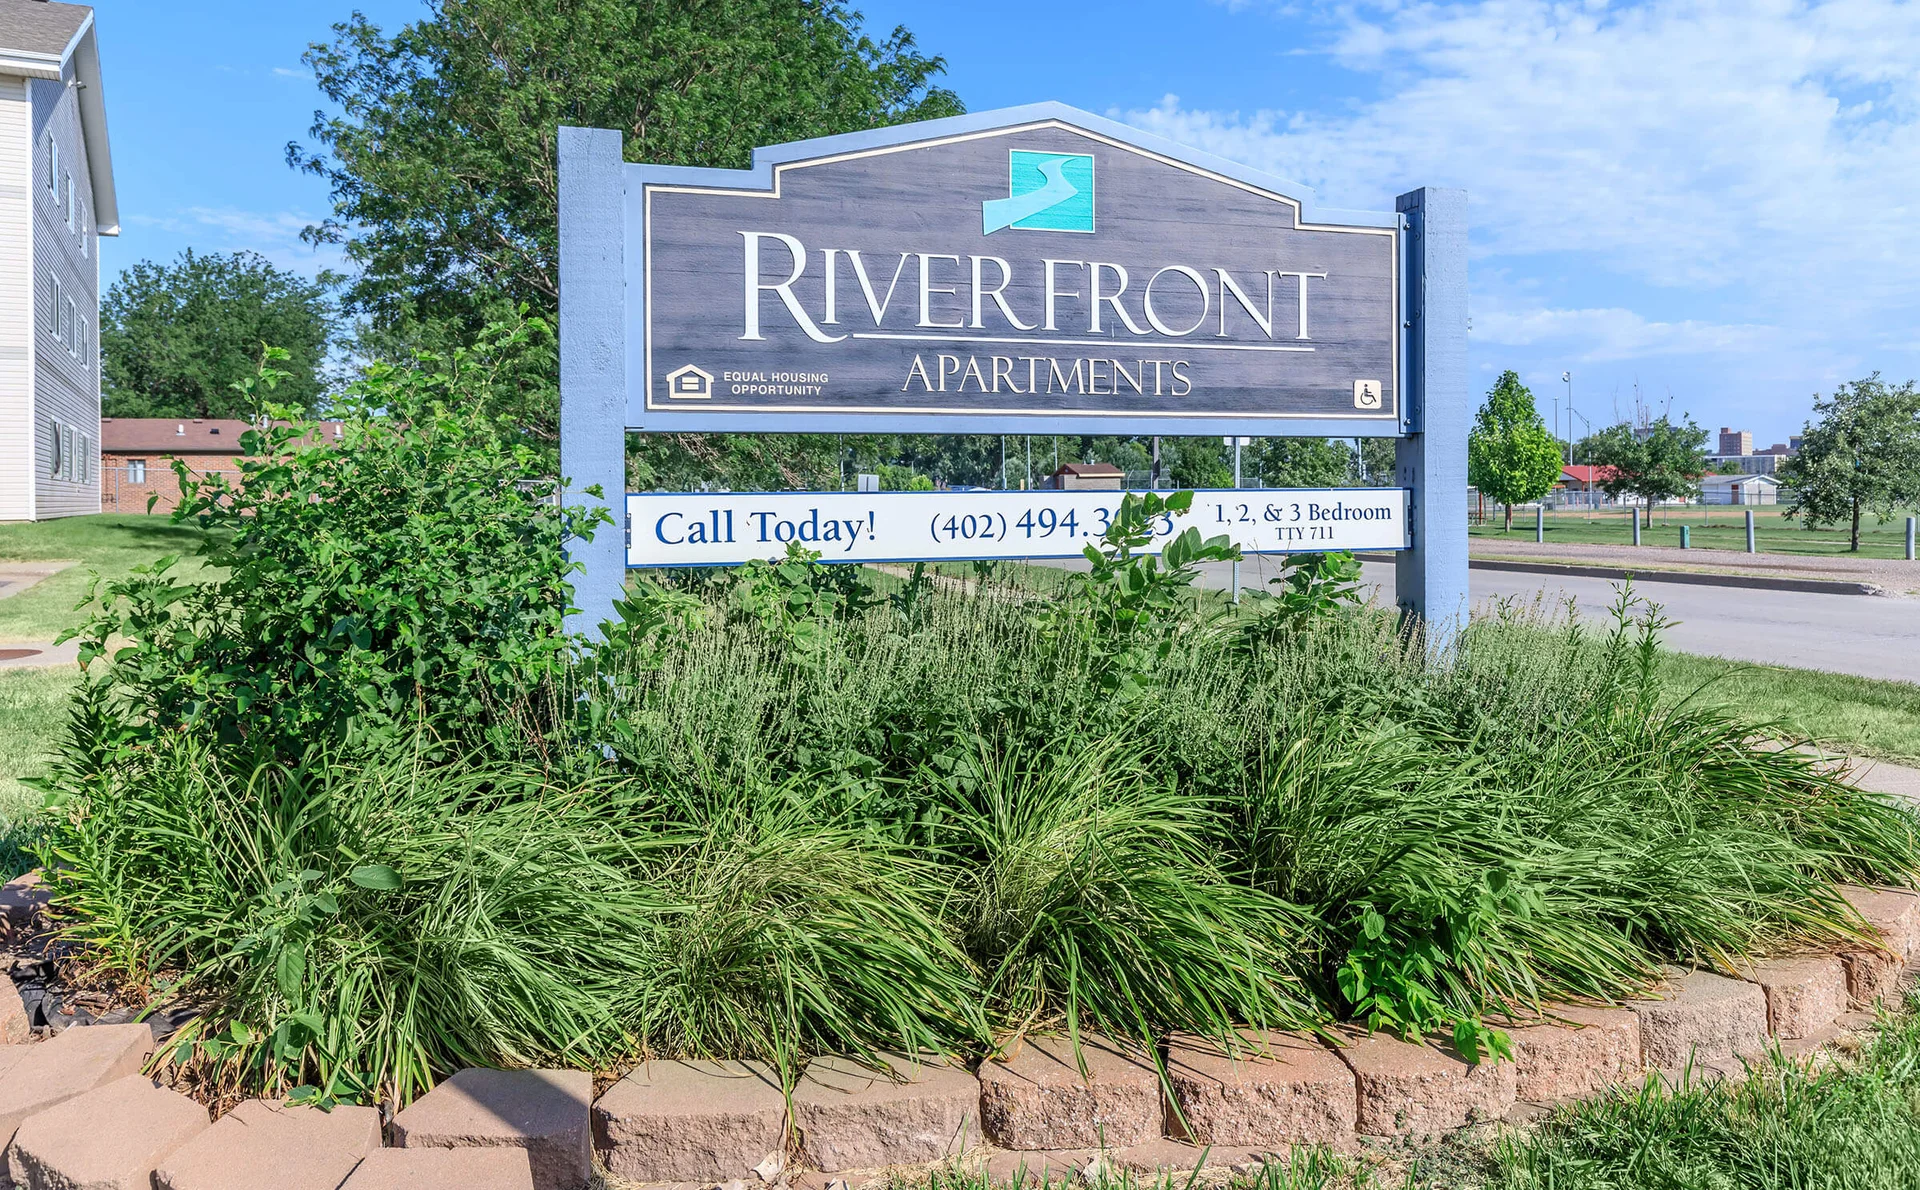 Riverfront Apartments Affordable Living